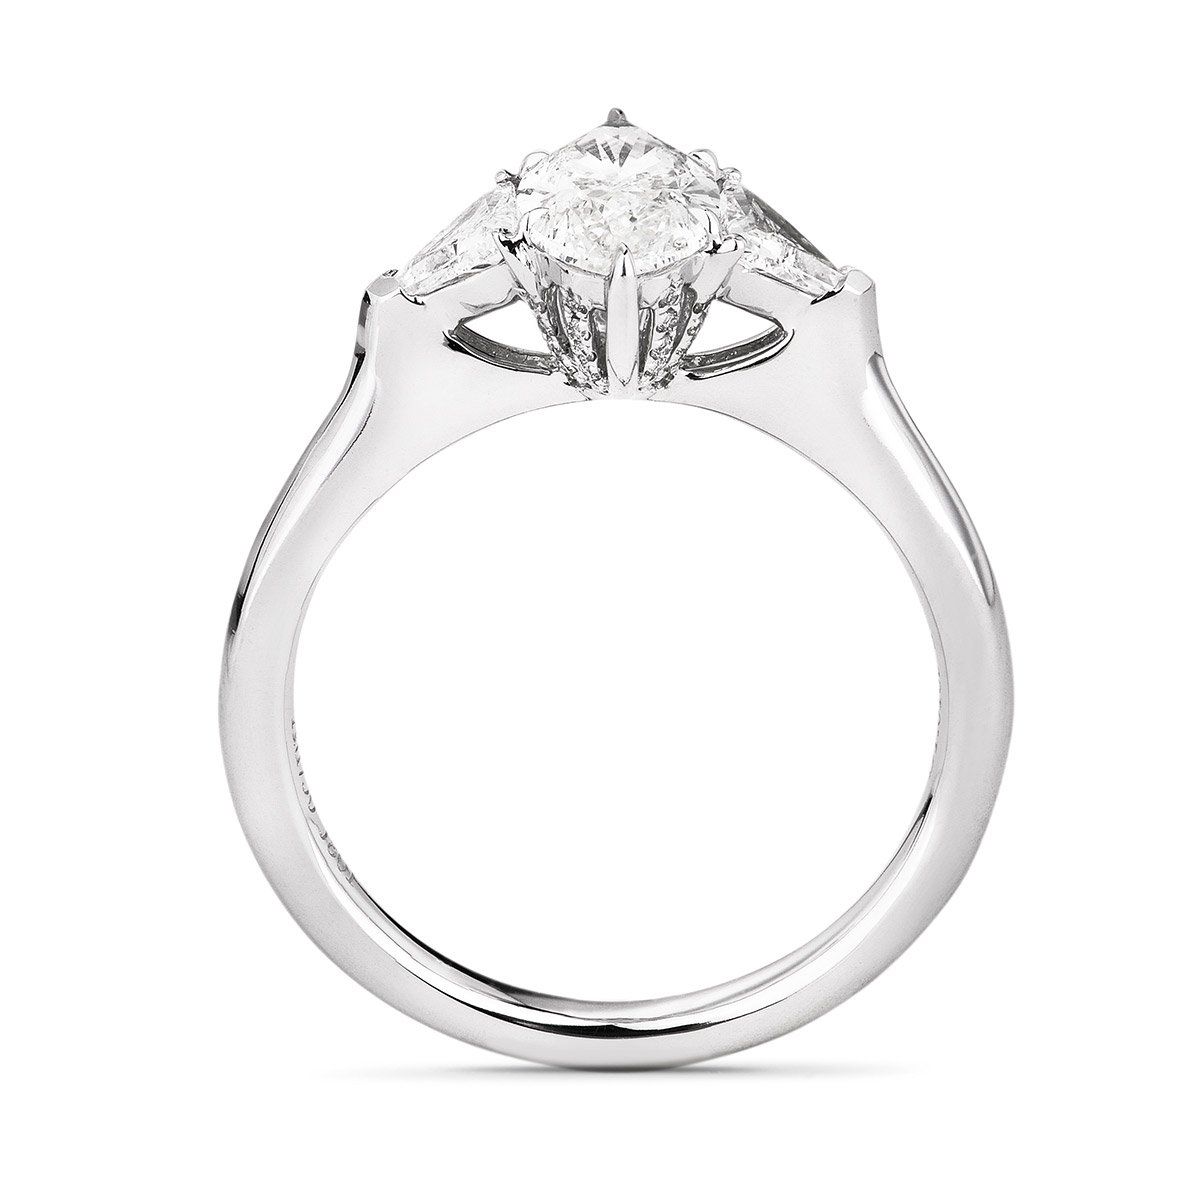  White Diamond Ring, 1.01 Ct. (1.36 Ct. TW), Marquise shape, GIA Certified, 2194902167